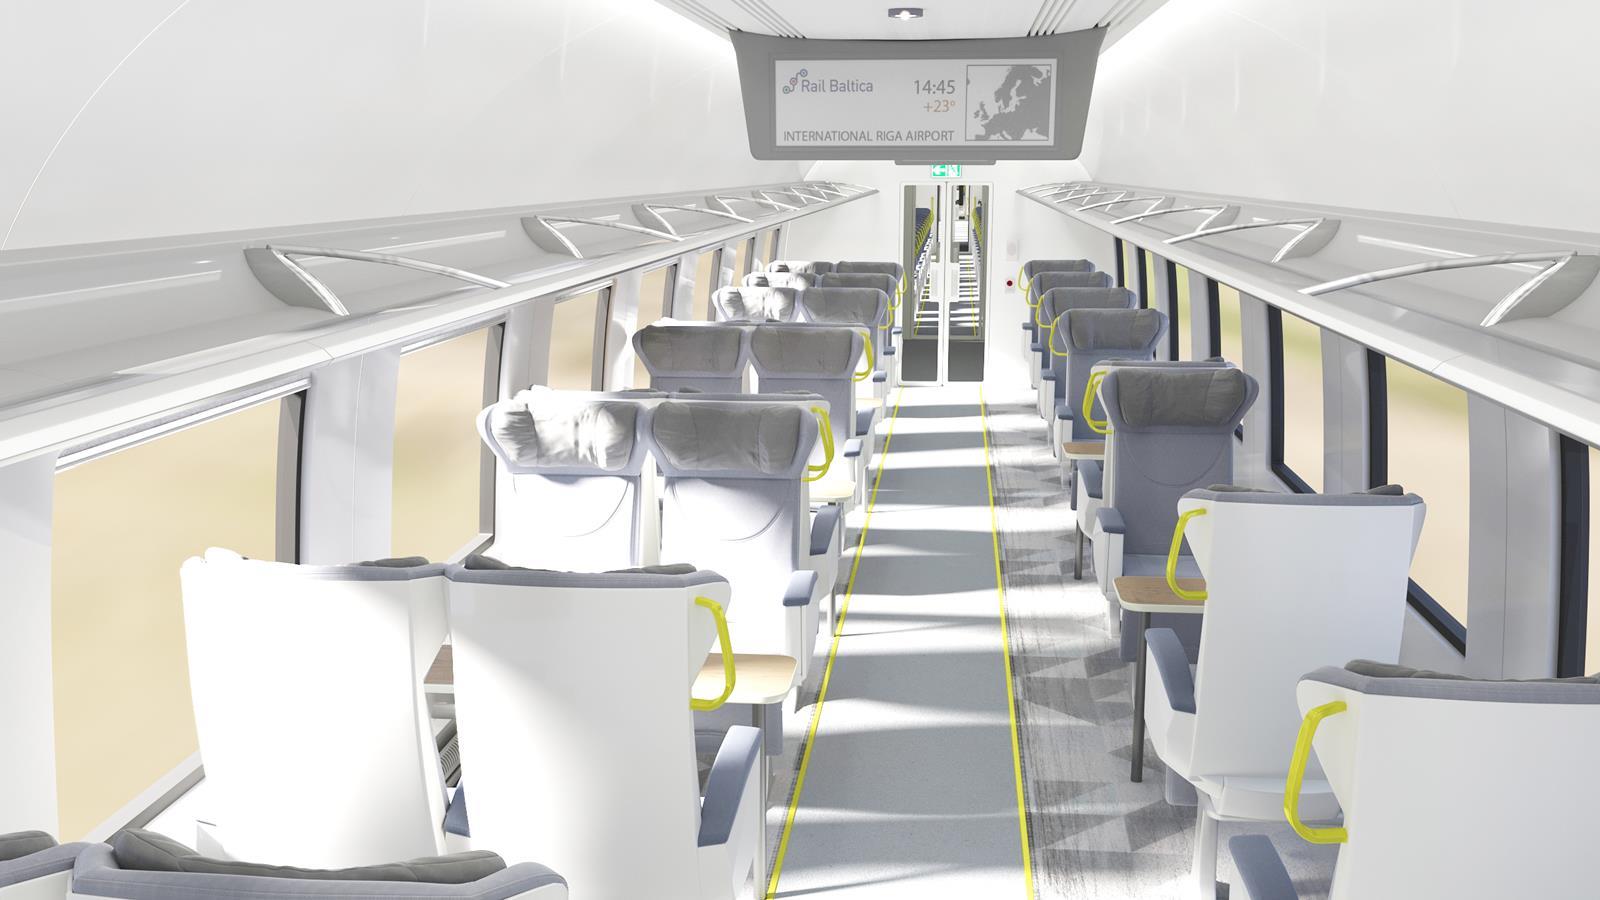 First class would have a higher level of comfort, with fewer people per coach, more personal space and extra legroom.